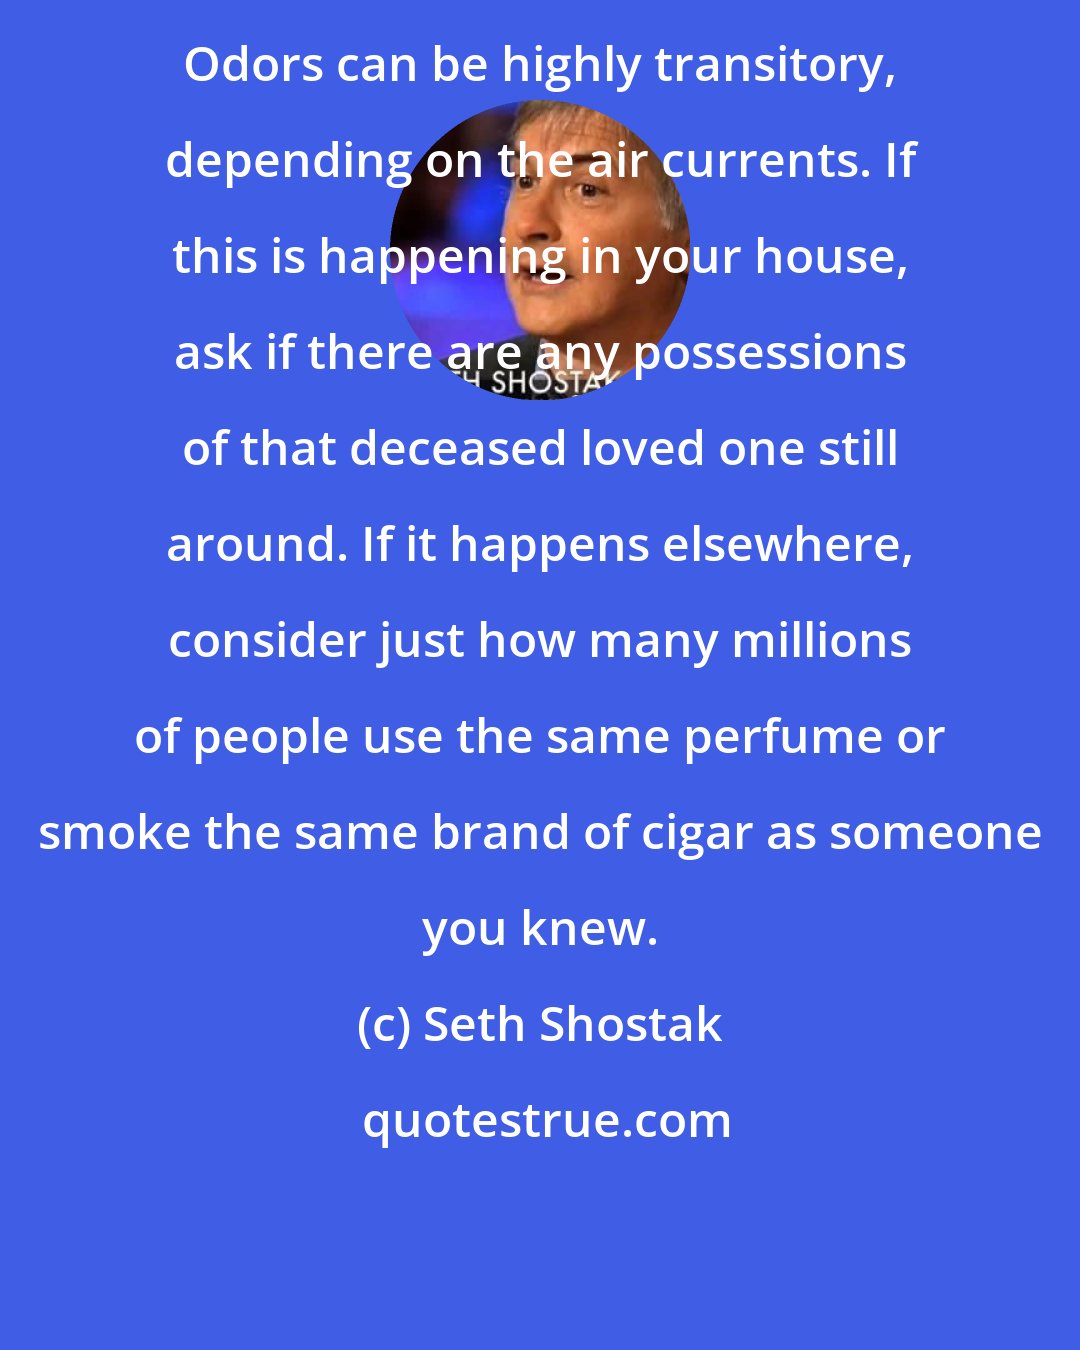 Seth Shostak: Odors can be highly transitory, depending on the air currents. If this is happening in your house, ask if there are any possessions of that deceased loved one still around. If it happens elsewhere, consider just how many millions of people use the same perfume or smoke the same brand of cigar as someone you knew.